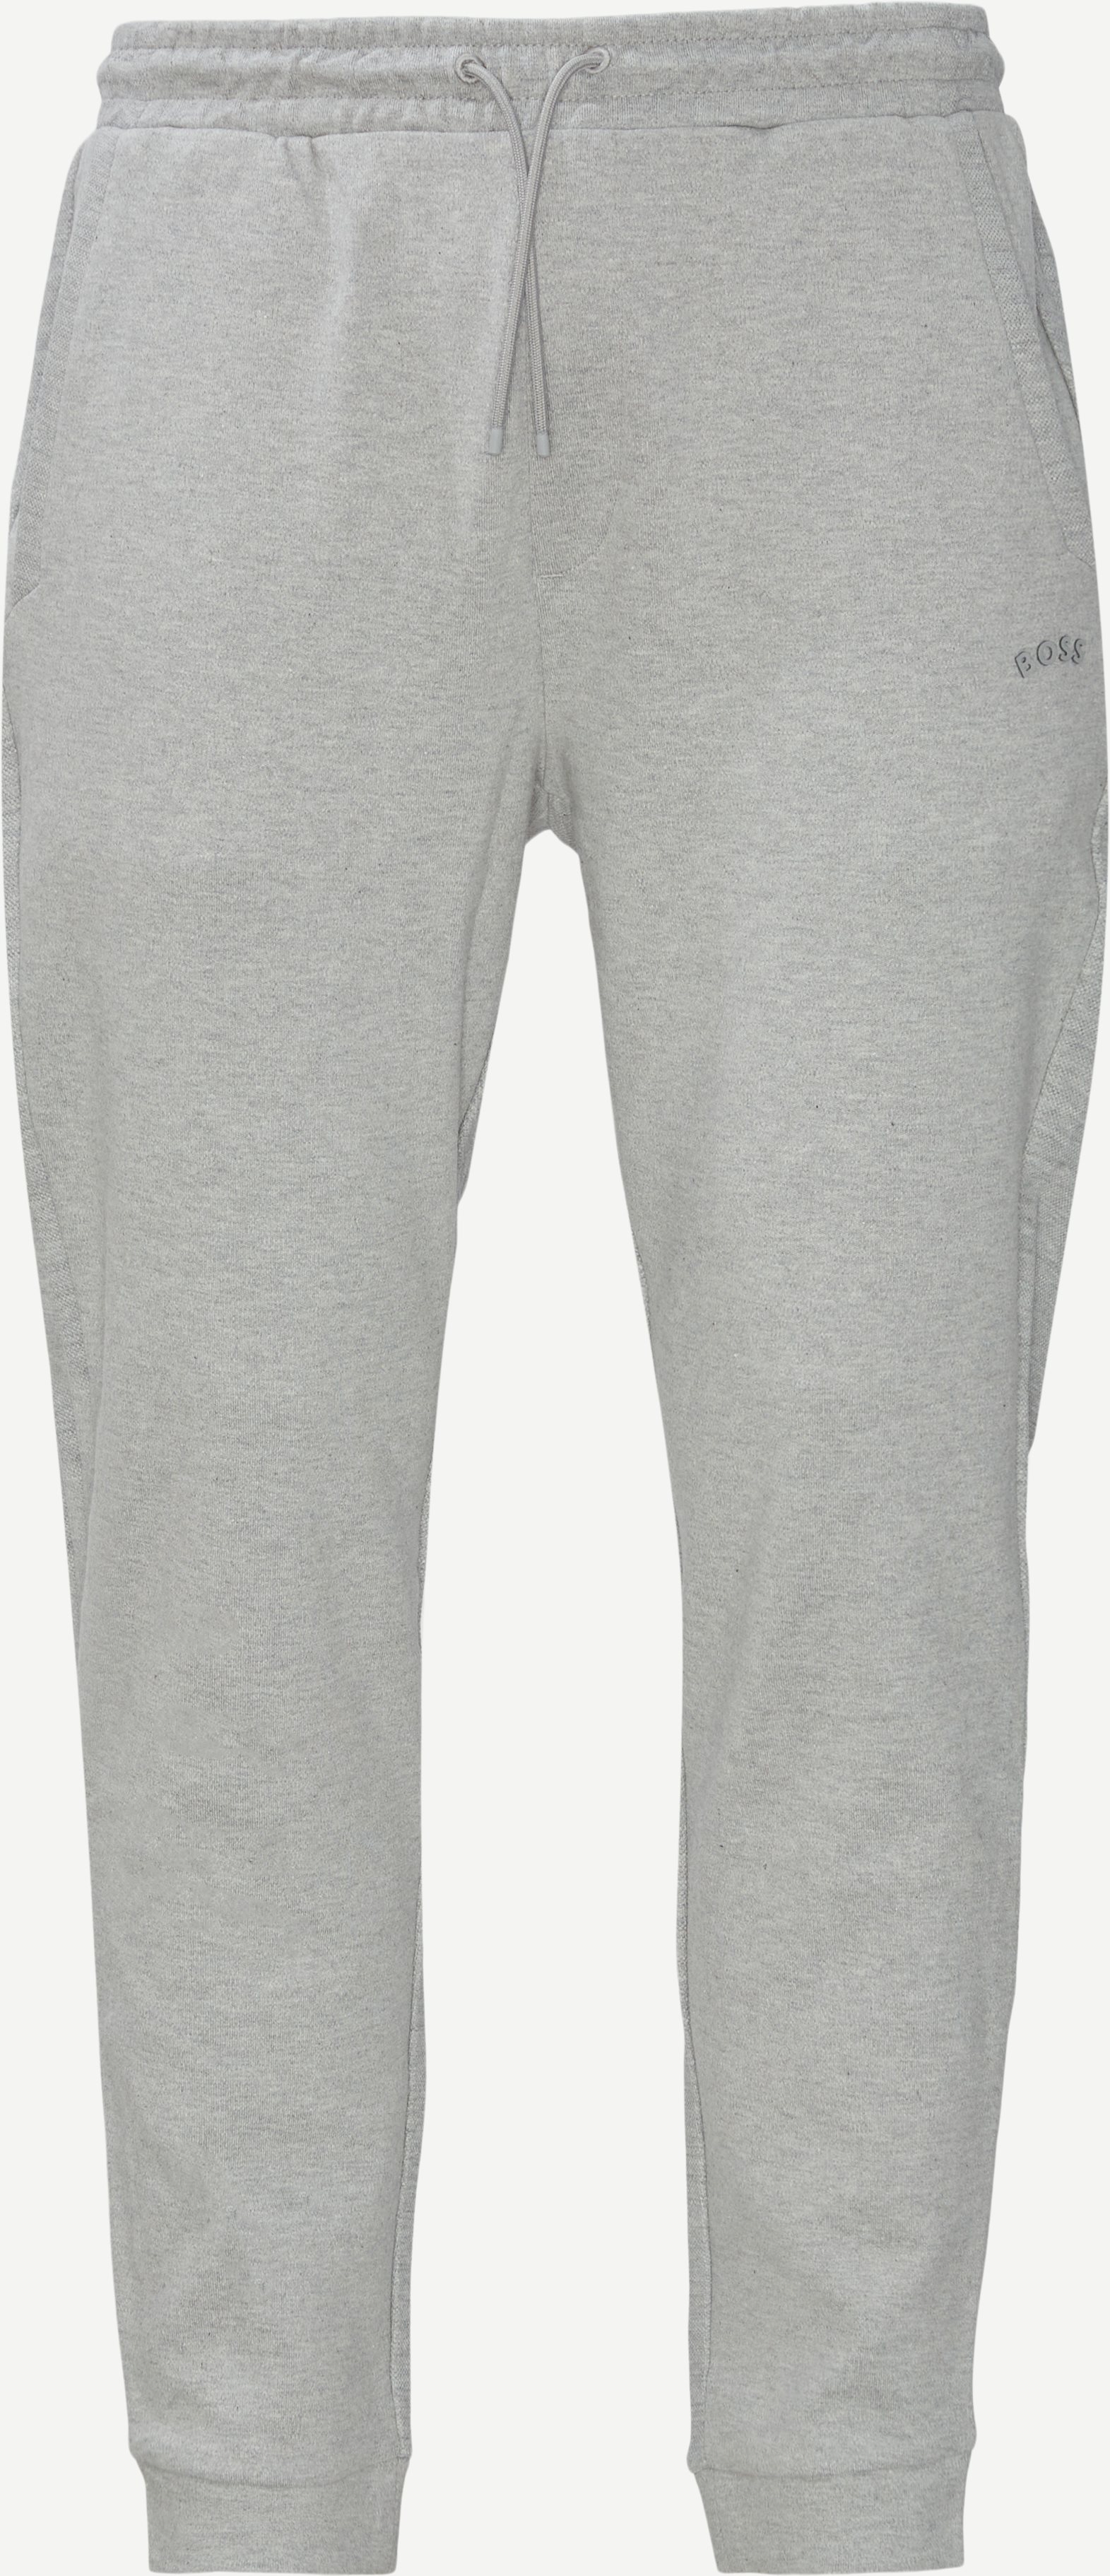 BOSS Athleisure Trousers 50469098 HADIKO CURVED Grey